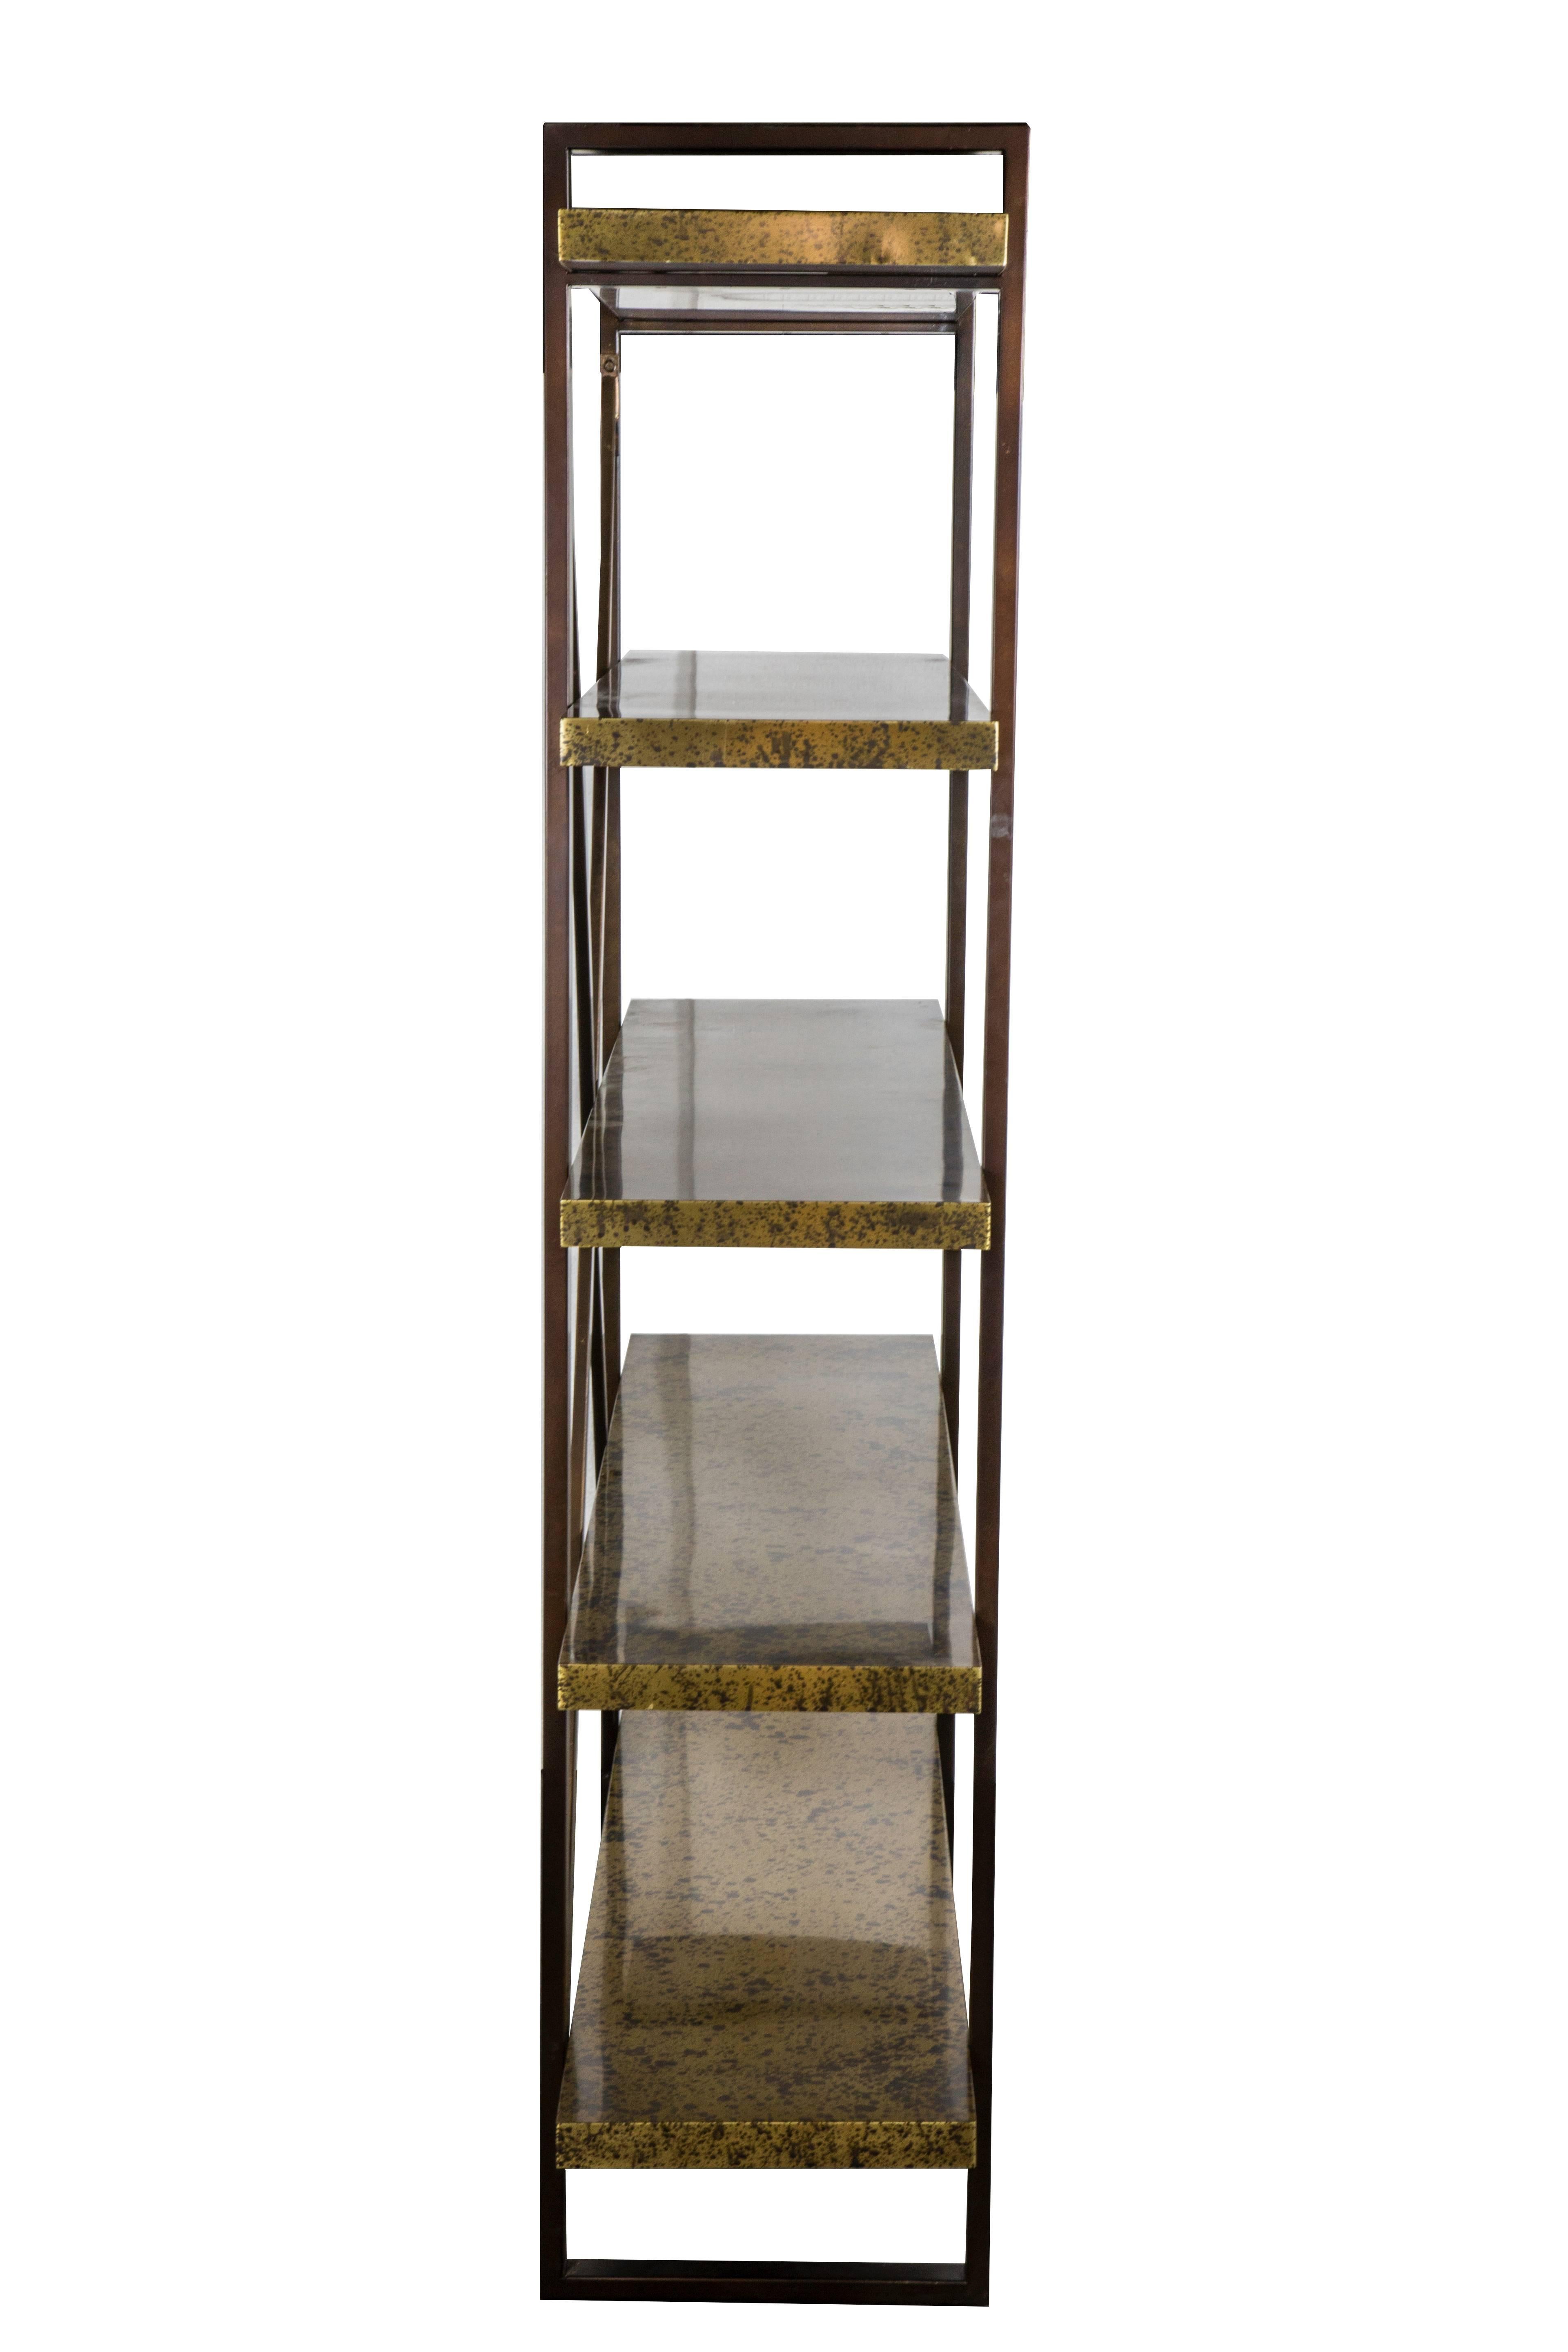 High quality brass and bronze finished Etagere. Shelves are solid wood veneered in sheet brass with retro acid finish. All remaining metal has an antiqued bronze finish. Ships fully assembled as a freestanding unit.